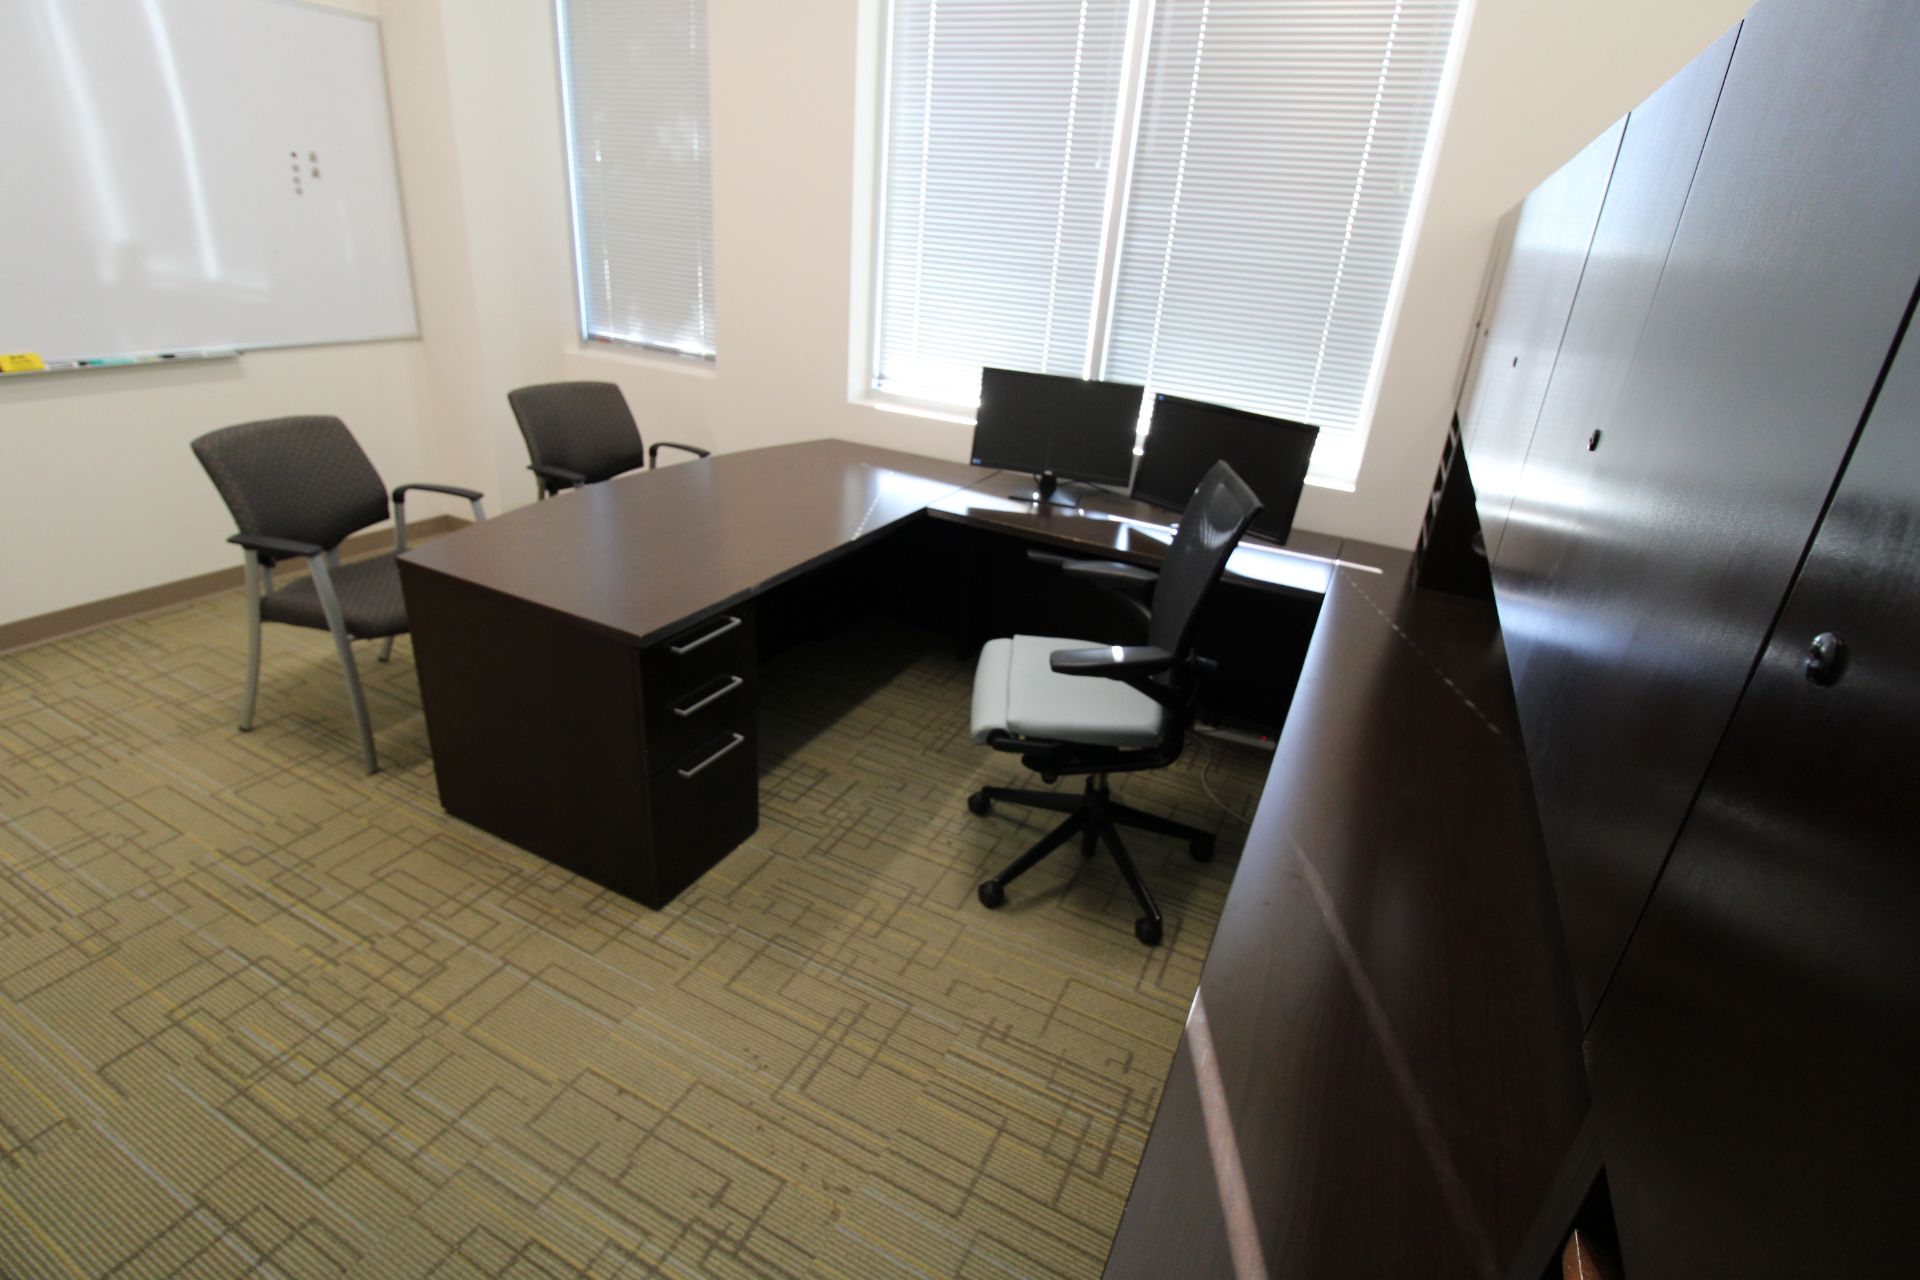 LOT OF DESK, CREDENZA, CHAIRS AND MONITORS - Image 2 of 3